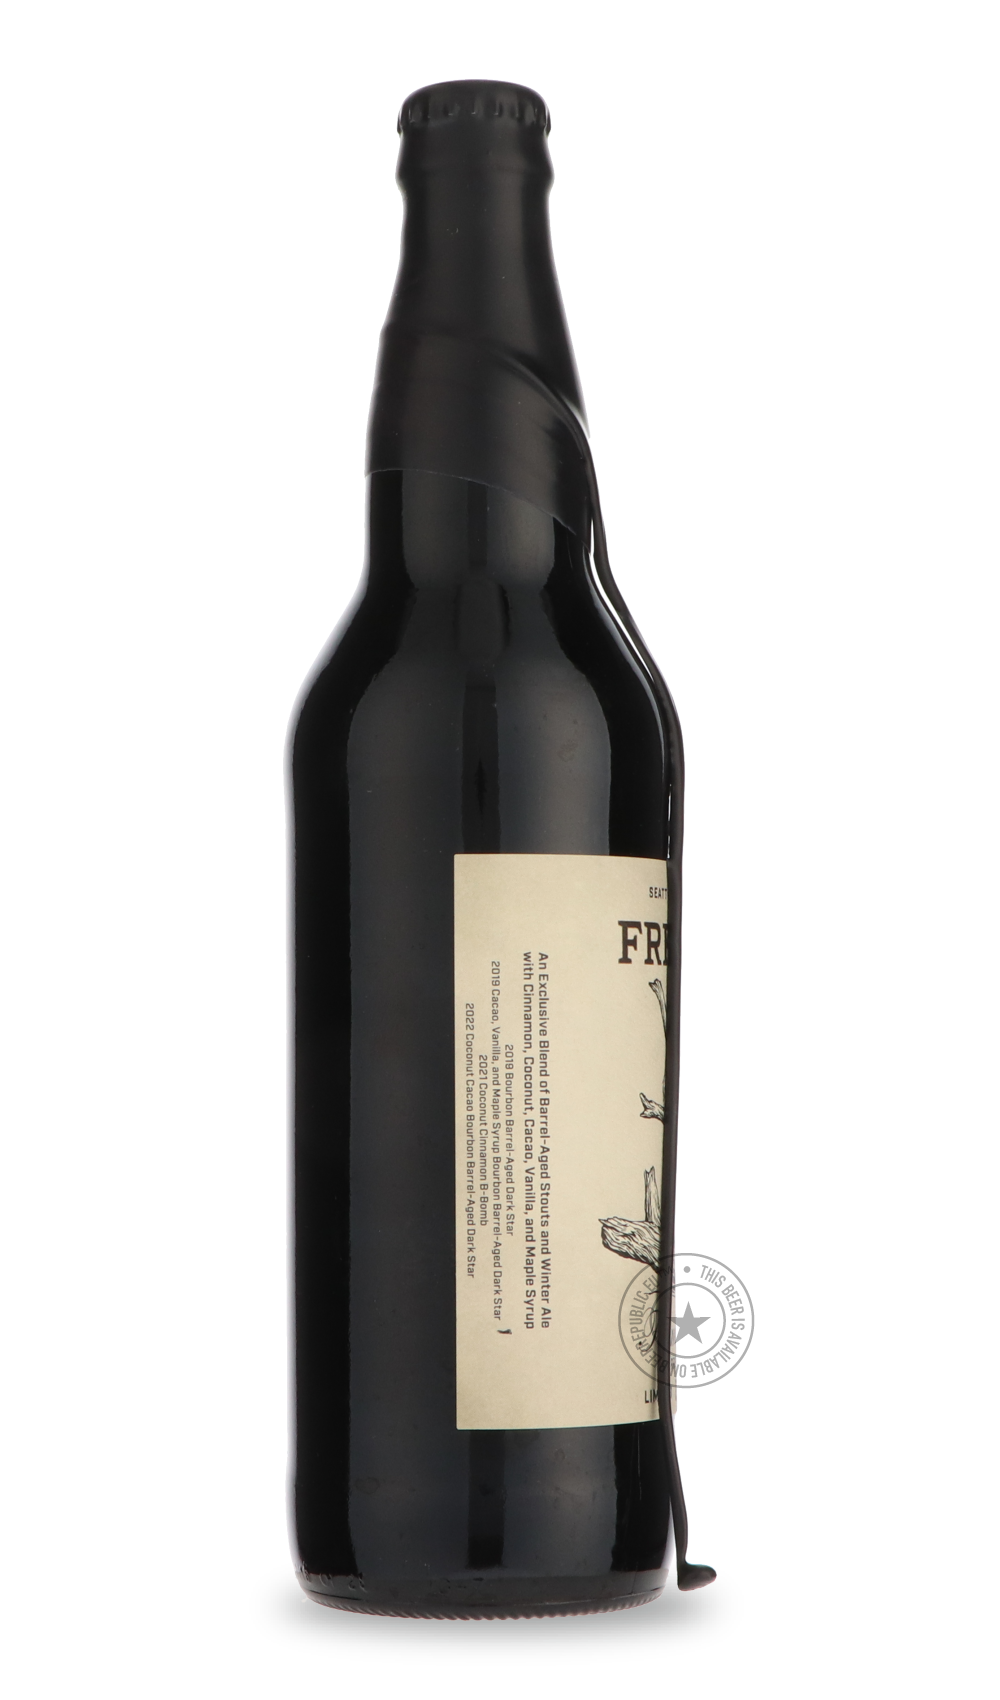 -Fremont- From the Vault 2022-Stout & Porter- Only @ Beer Republic - The best online beer store for American & Canadian craft beer - Buy beer online from the USA and Canada - Bier online kopen - Amerikaans bier kopen - Craft beer store - Craft beer kopen - Amerikanisch bier kaufen - Bier online kaufen - Acheter biere online - IPA - Stout - Porter - New England IPA - Hazy IPA - Imperial Stout - Barrel Aged - Barrel Aged Imperial Stout - Brown - Dark beer - Blond - Blonde - Pilsner - Lager - Wheat - Weizen - 